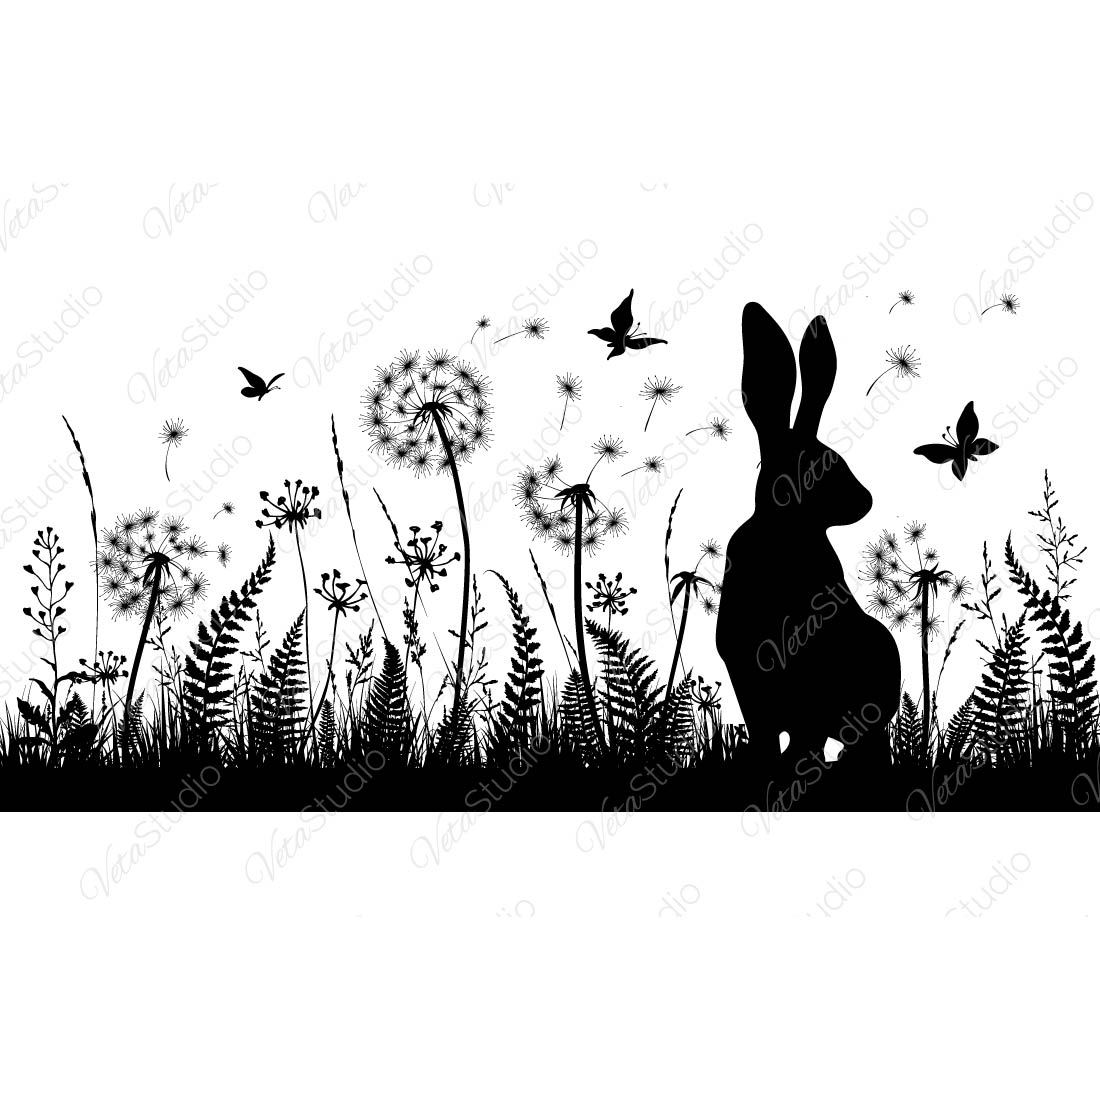 Floral Background With Rabbit And Dandelions cover image.